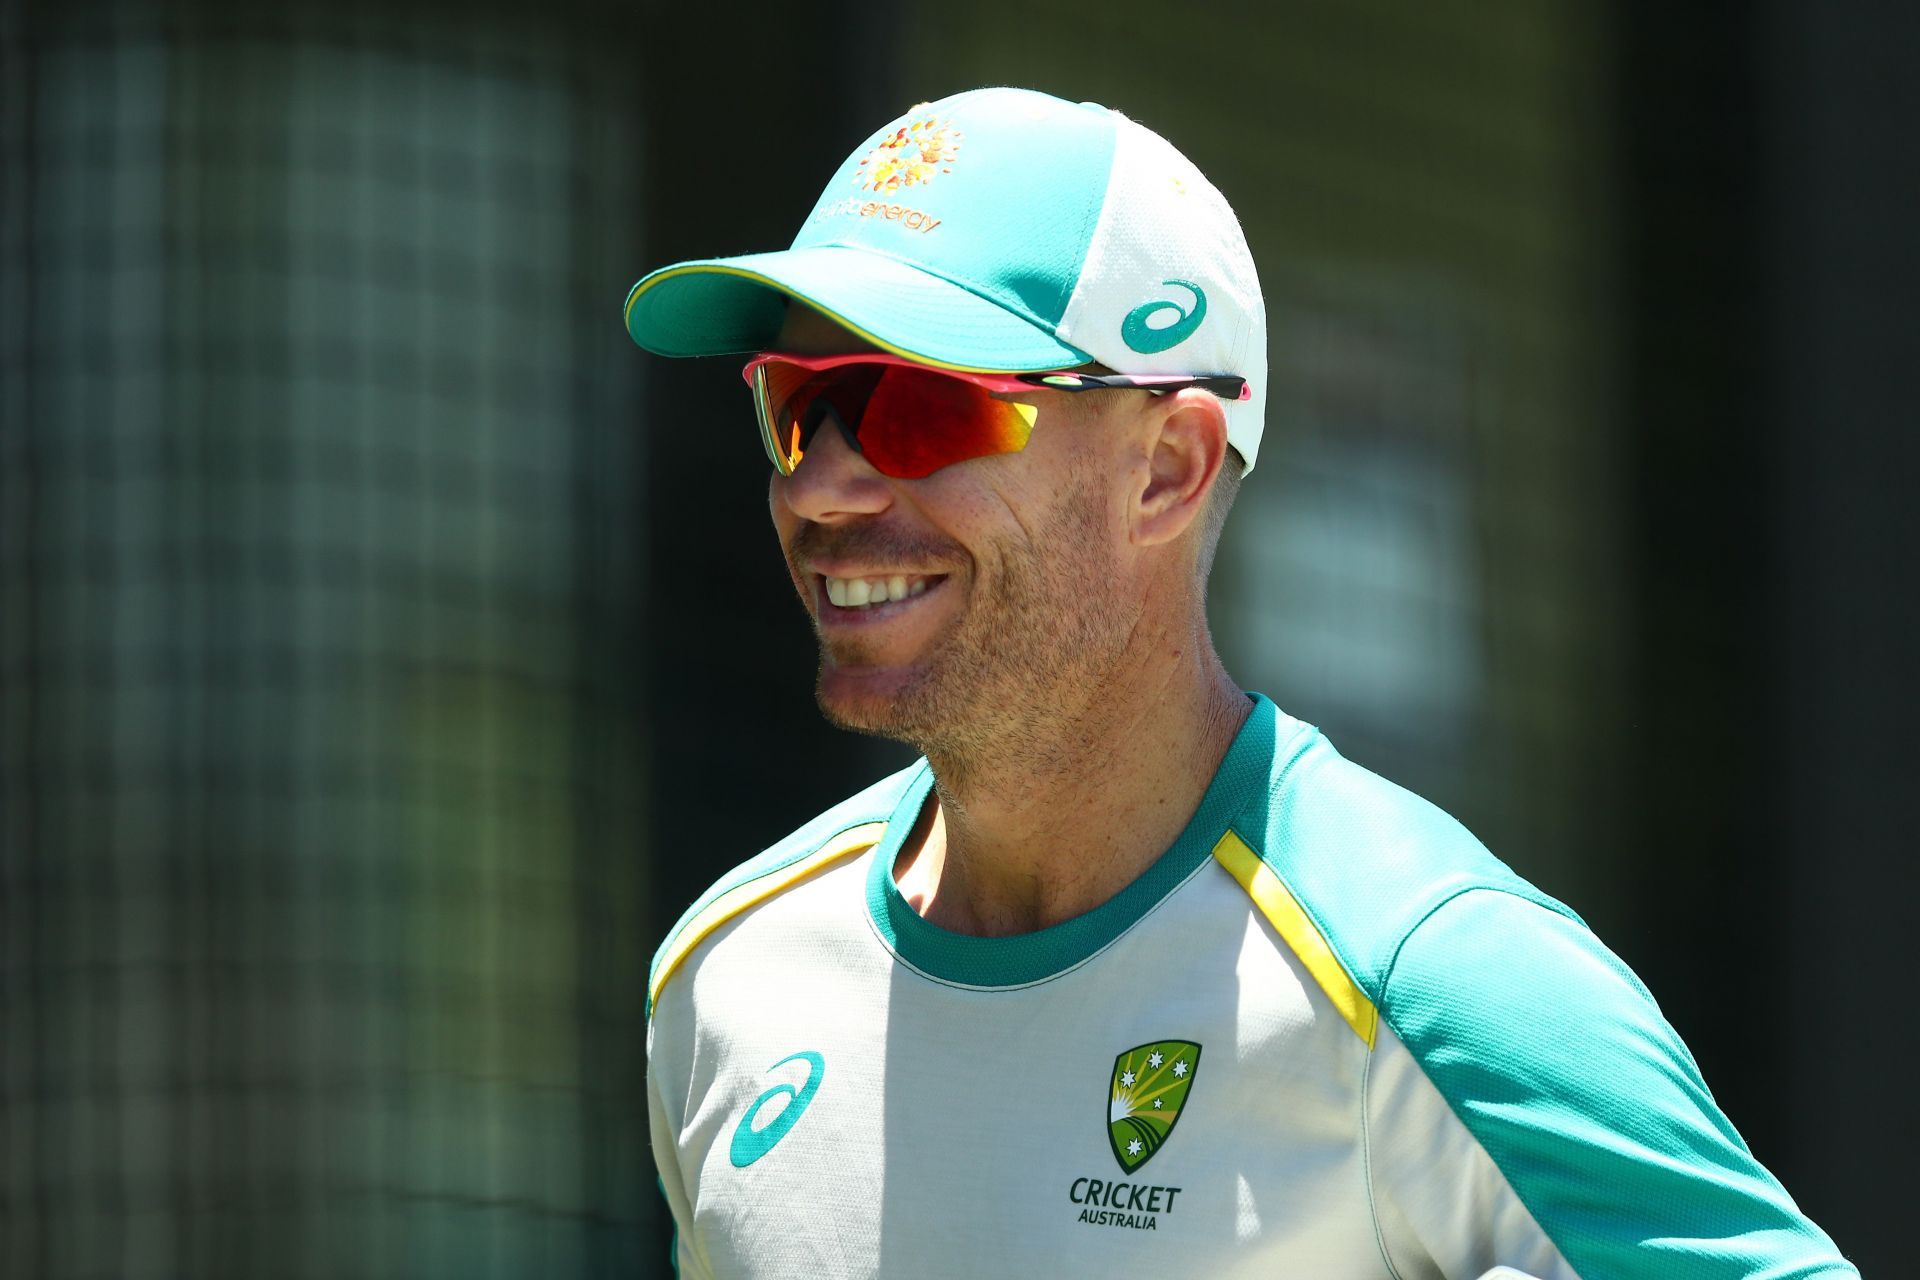 David Warner had an Ashes campaign to forget in 2019 in England